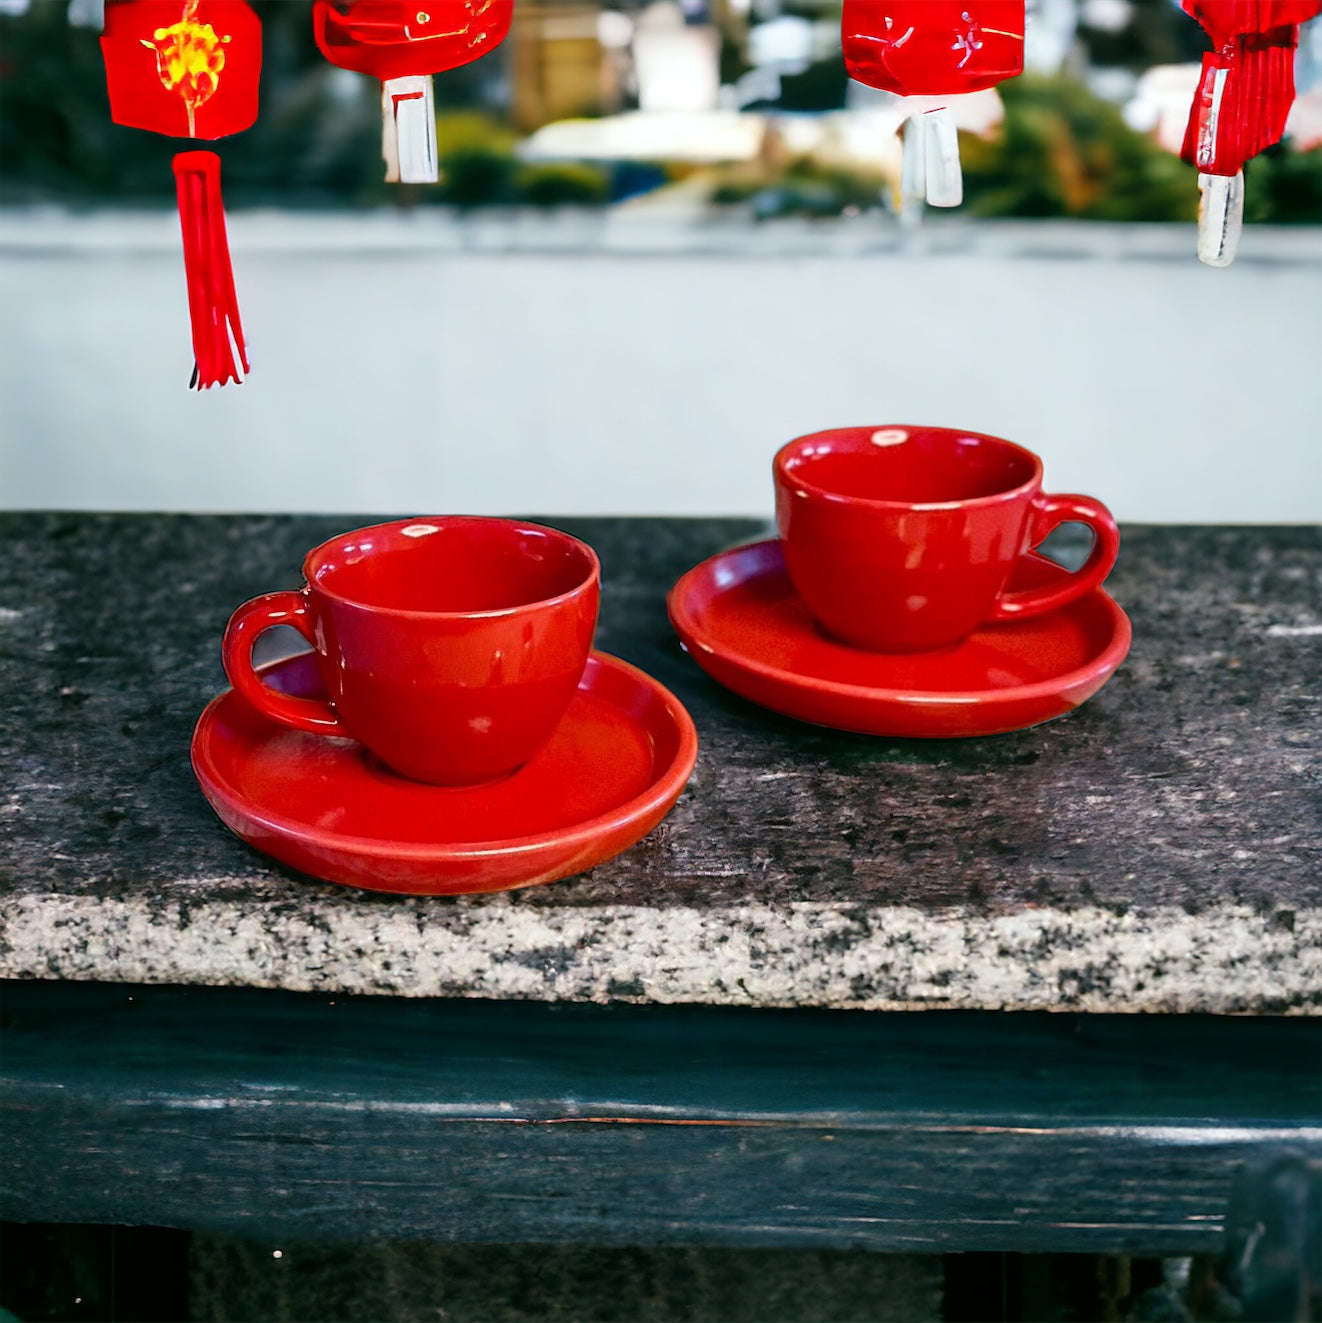 Red PetitePleasure Cups & Sauce Set for 2